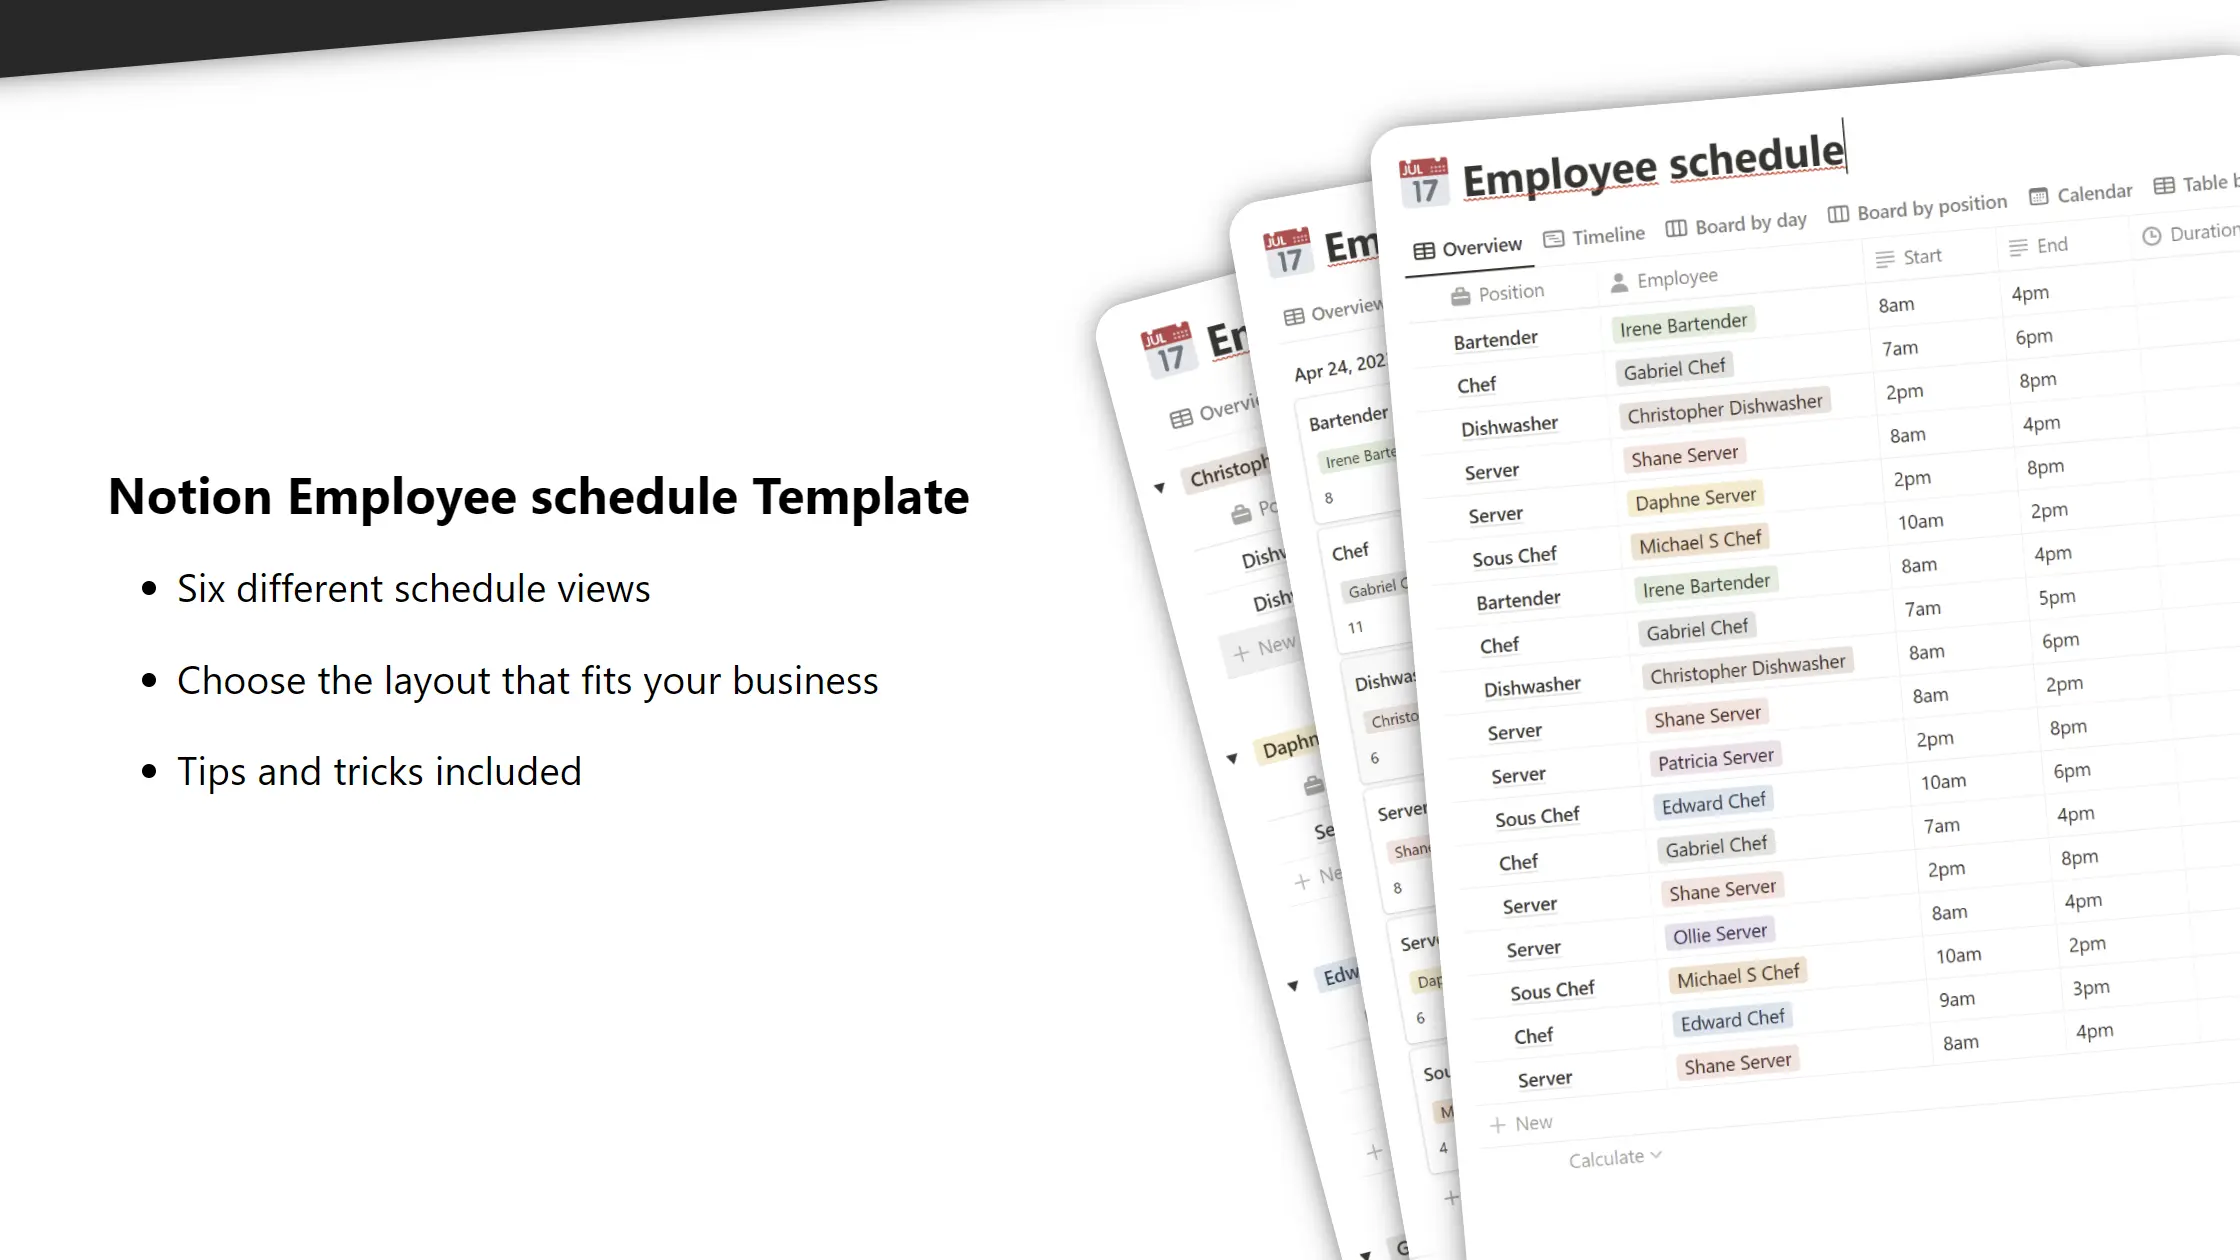 Notion Employee Schedule Template image